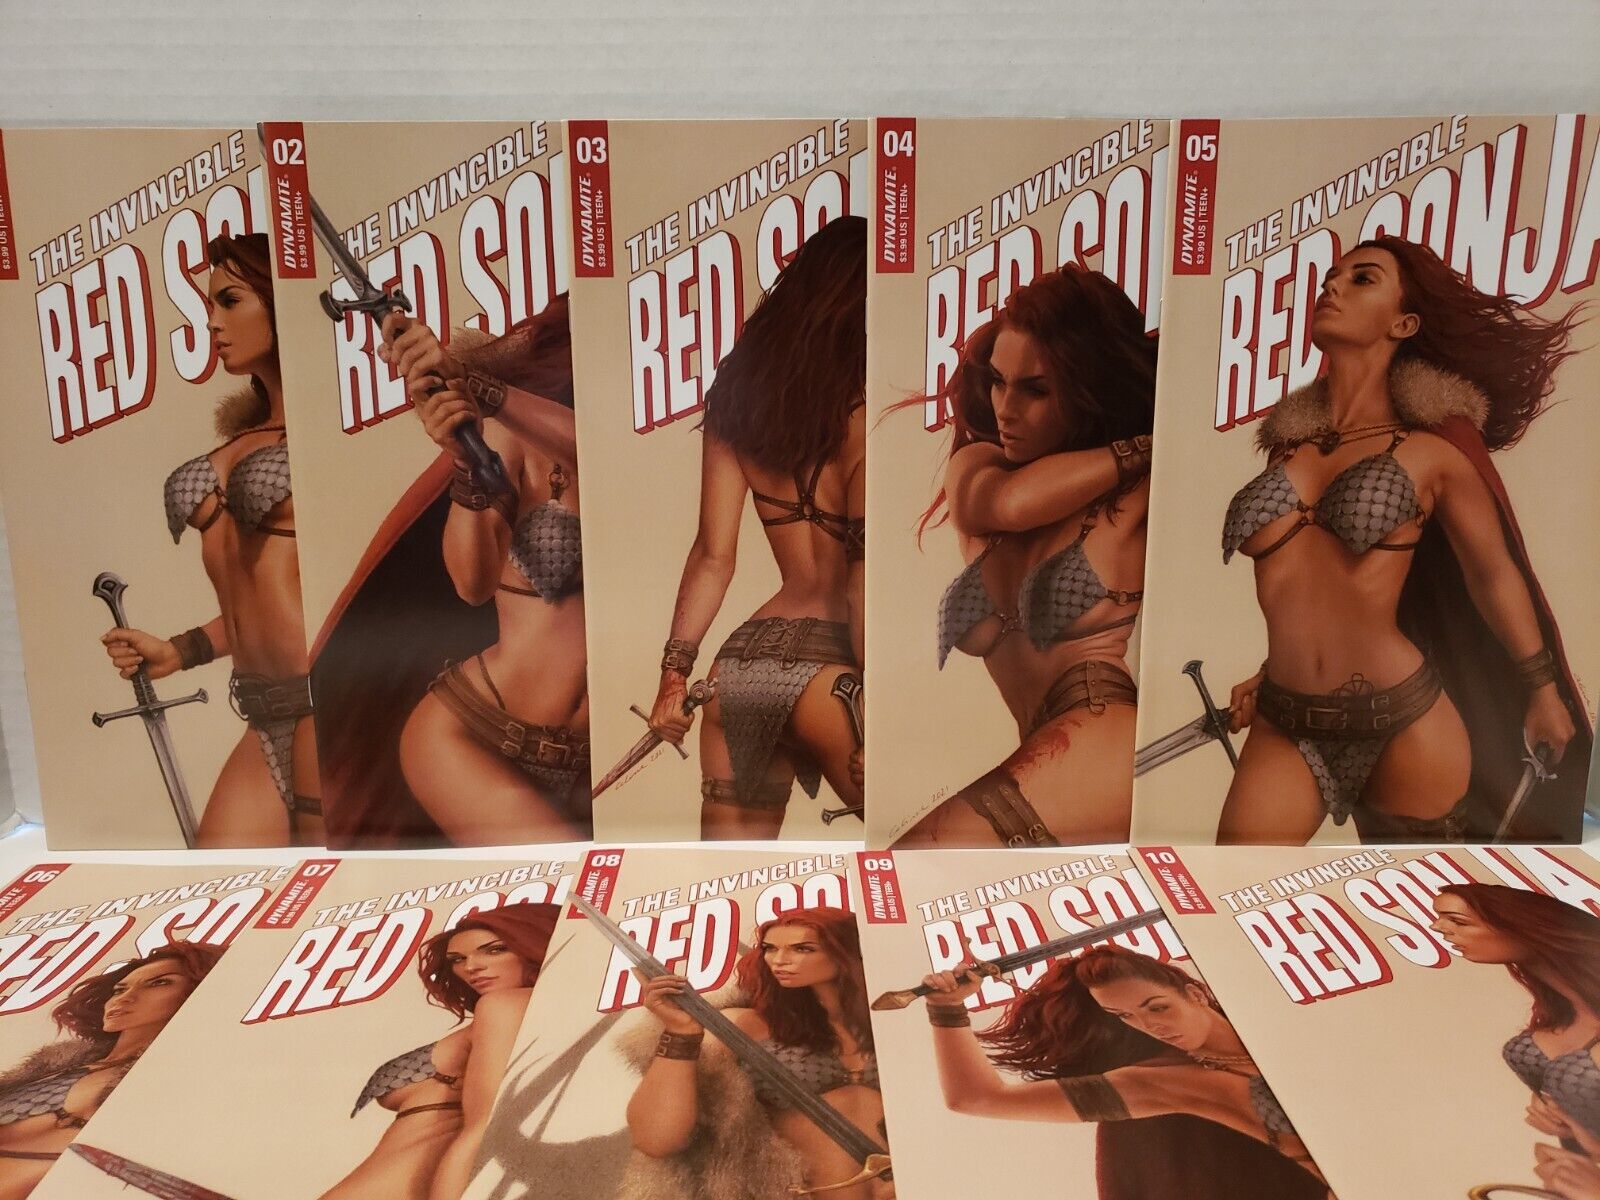 Invincible Red Sonja #1-10 (NM/NM+ or 9.4/9.6) - Complete Series - Celina Covers